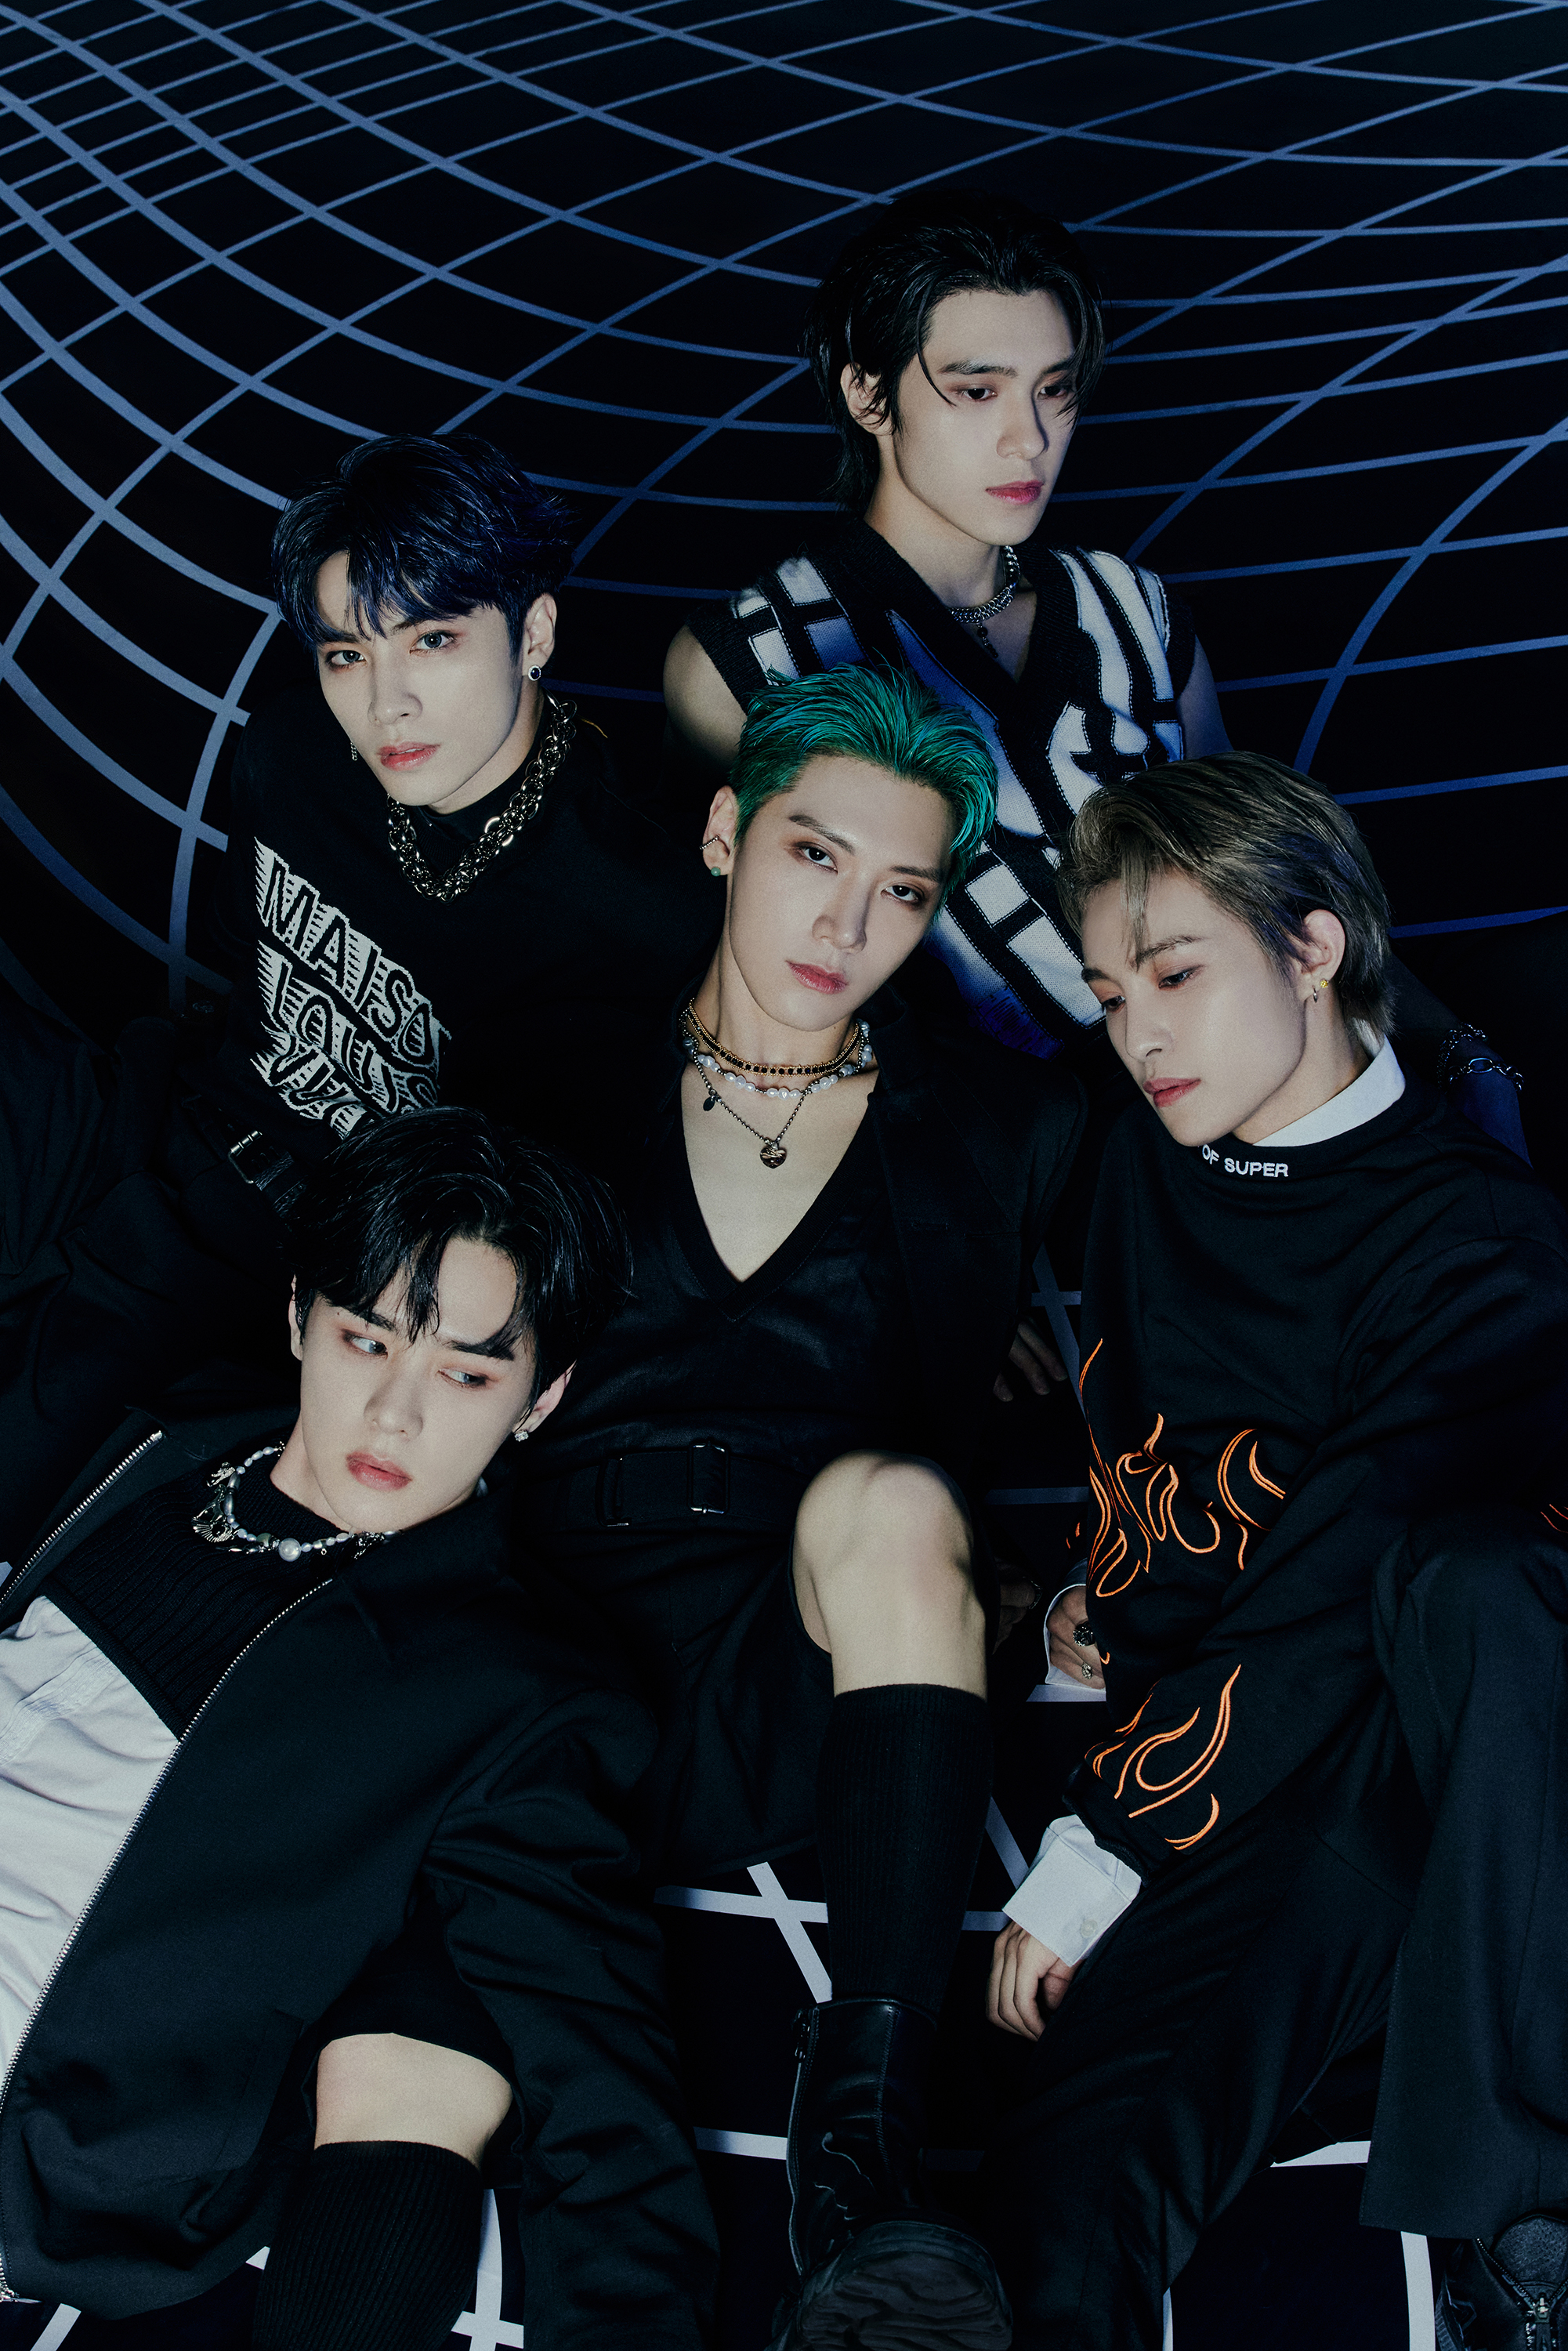 wayvofficial ON MY YOUTH now in store 🖤 #kpop #kpopstore #kpopbayarea  #bayareakpop #kpopshop #wayv